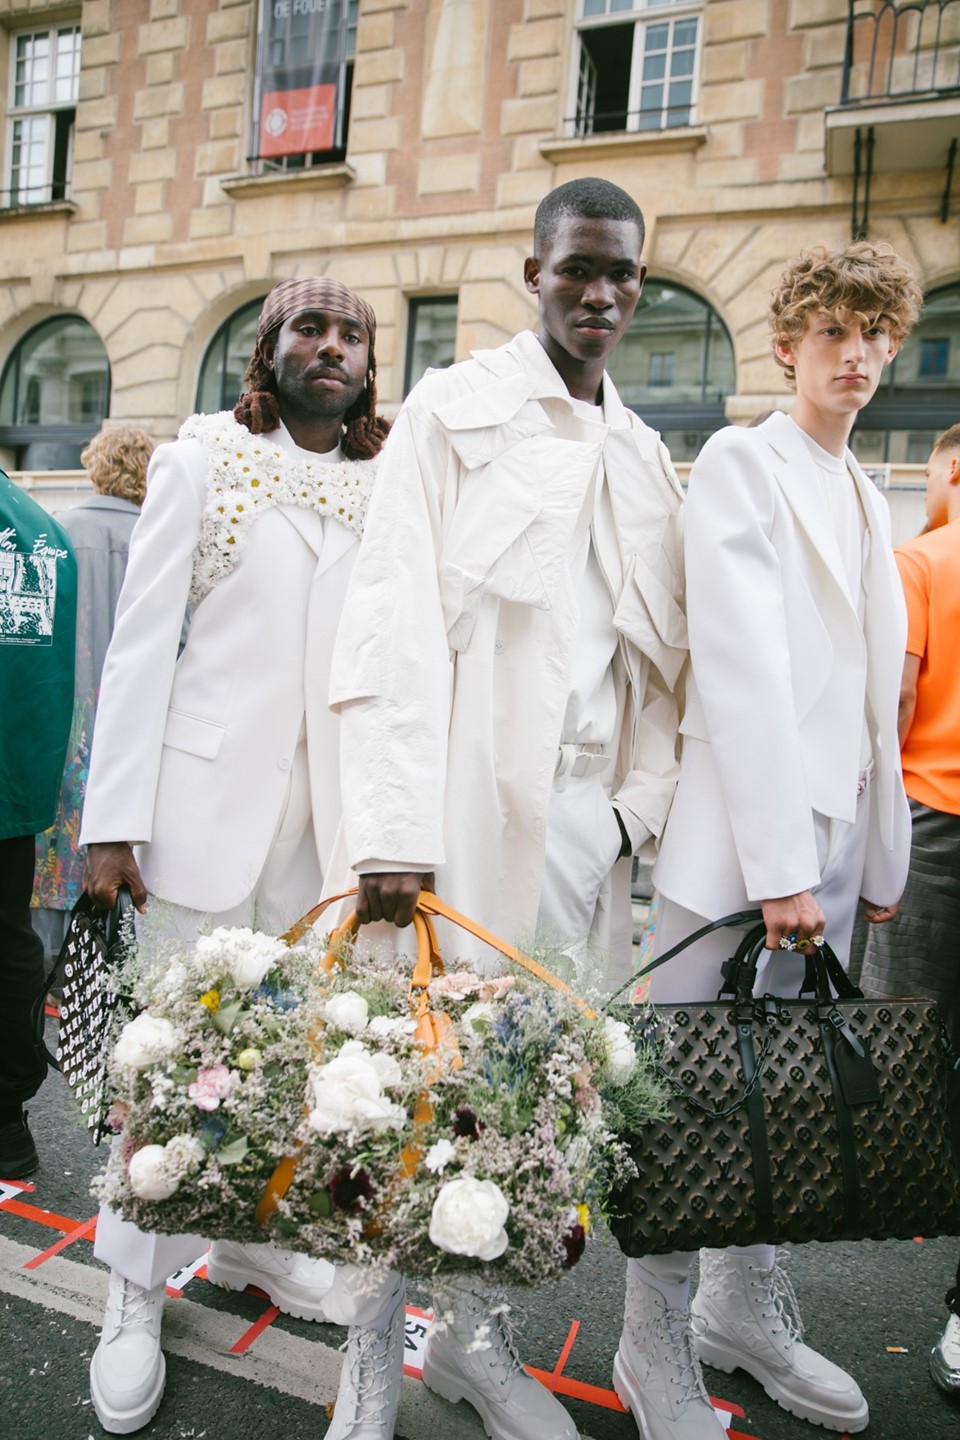 Blooming flowers, a bouncy castle, and Dev Hynes show up at Louis